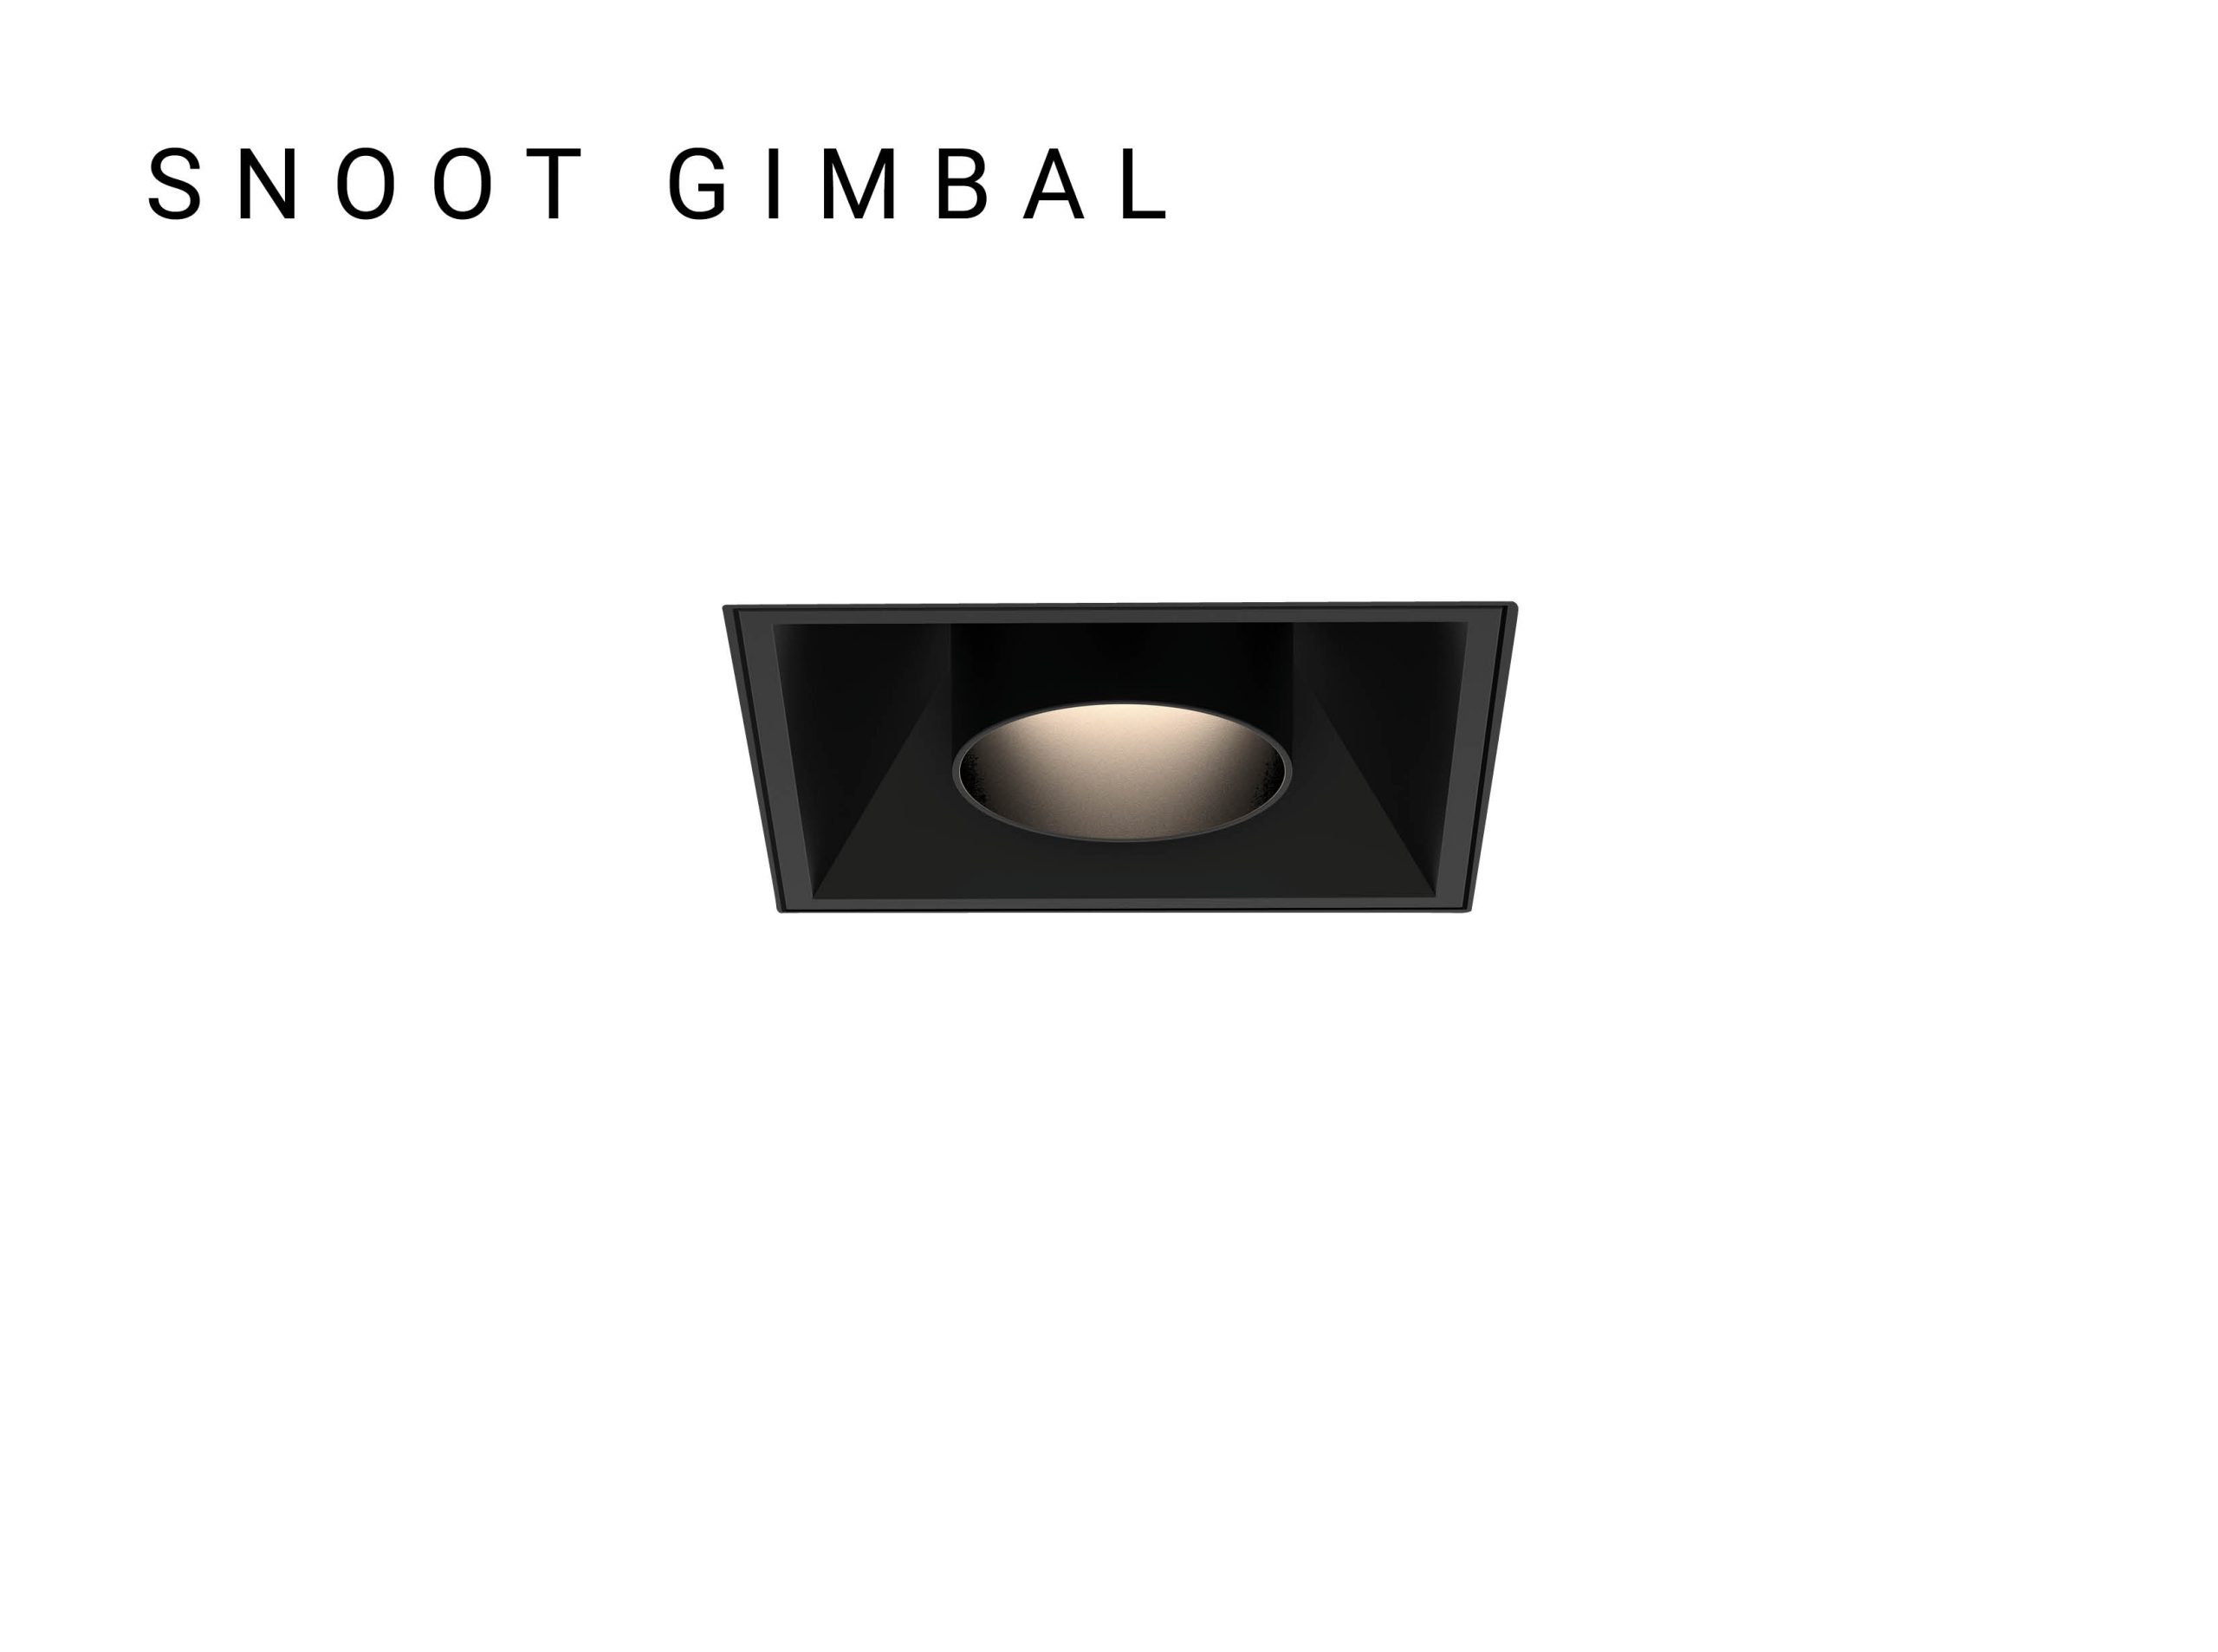 Bravo_SNOOT-GIMBAL_Banner_01-scaled